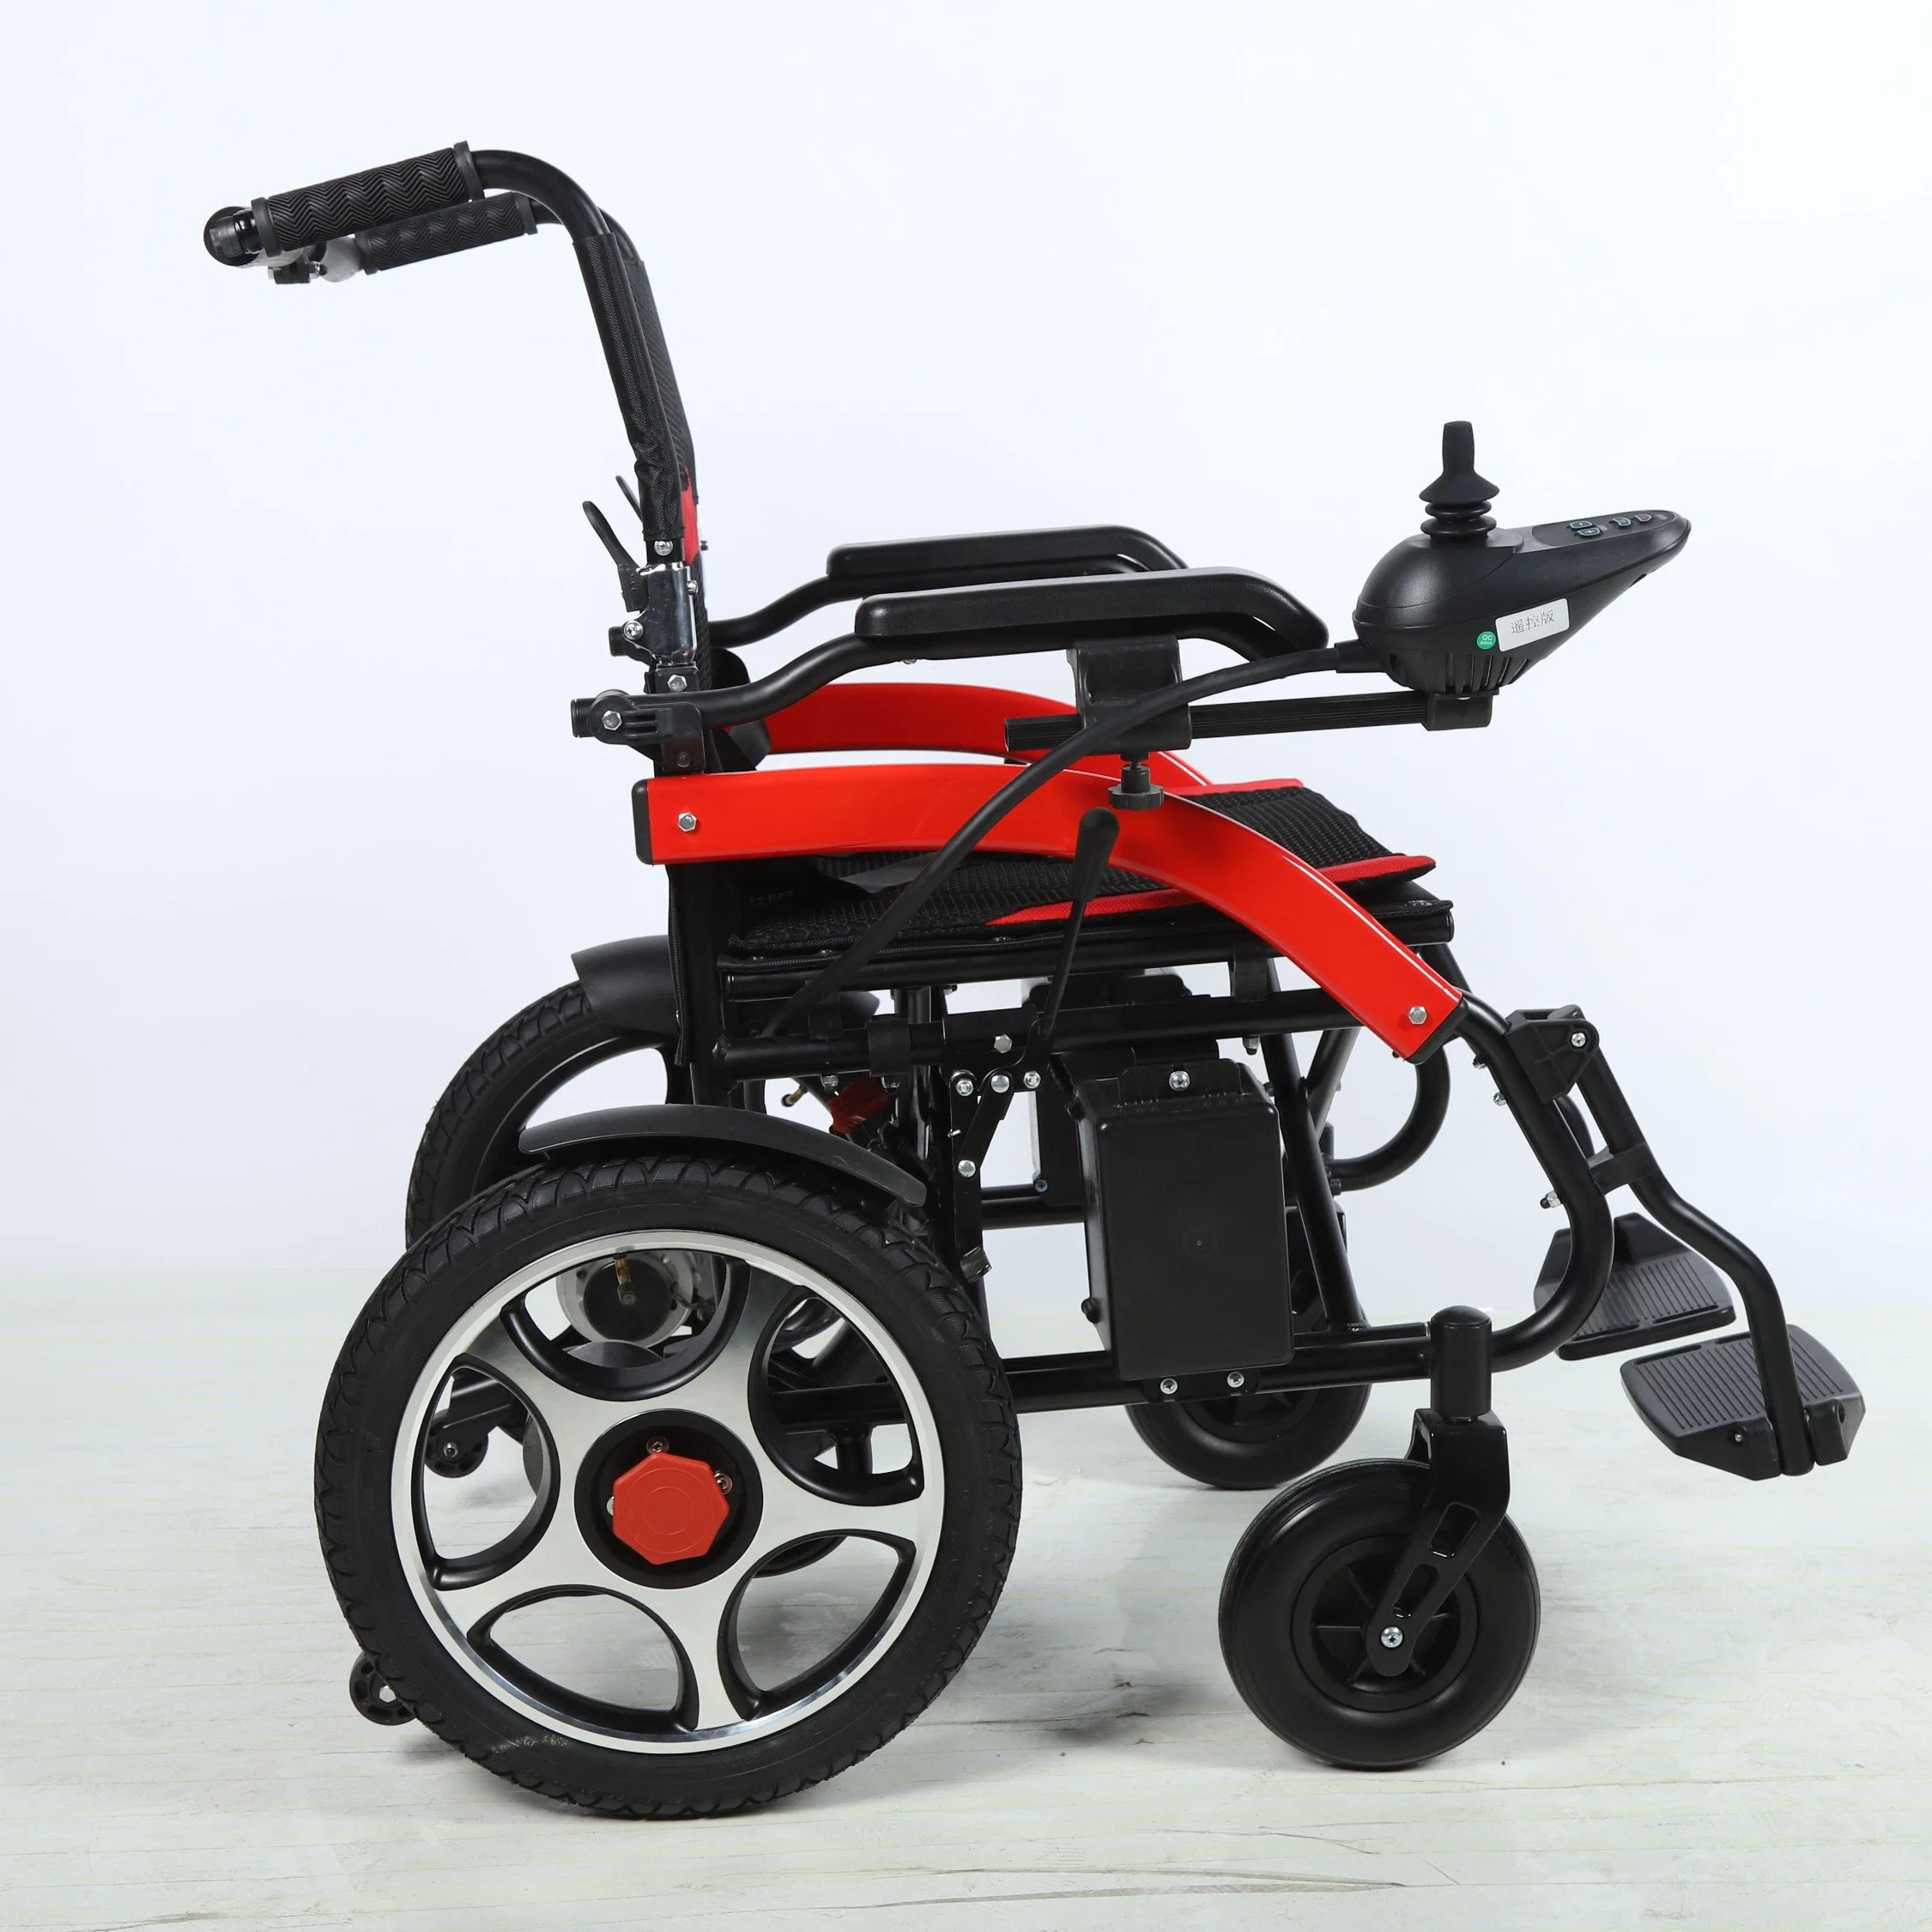 OEM New Customized Electric Scooter Bike Motorcycle Medical Equipment Wheel Chair Iyasocare Wheelchair